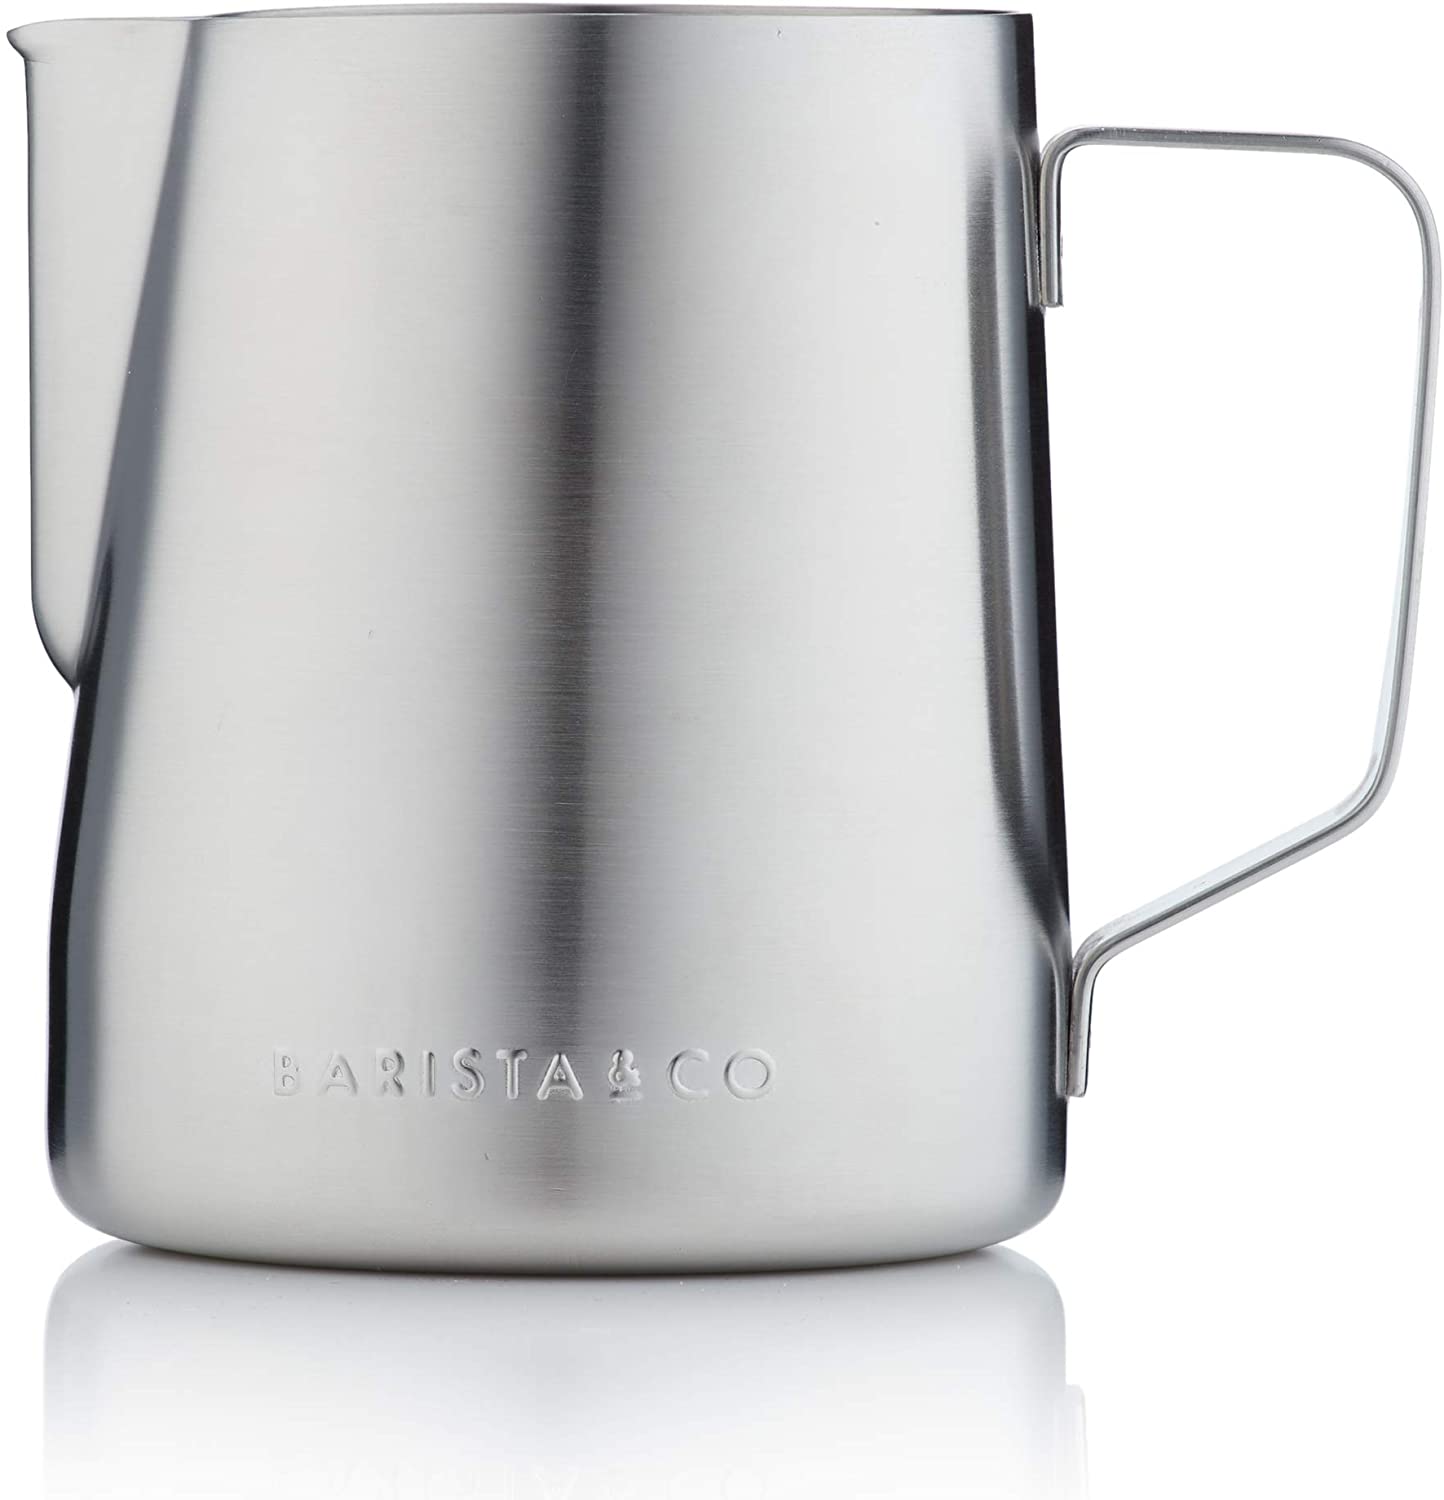 Barista & Co BC046-029 Milk Jug, Stainless Steel, Gold